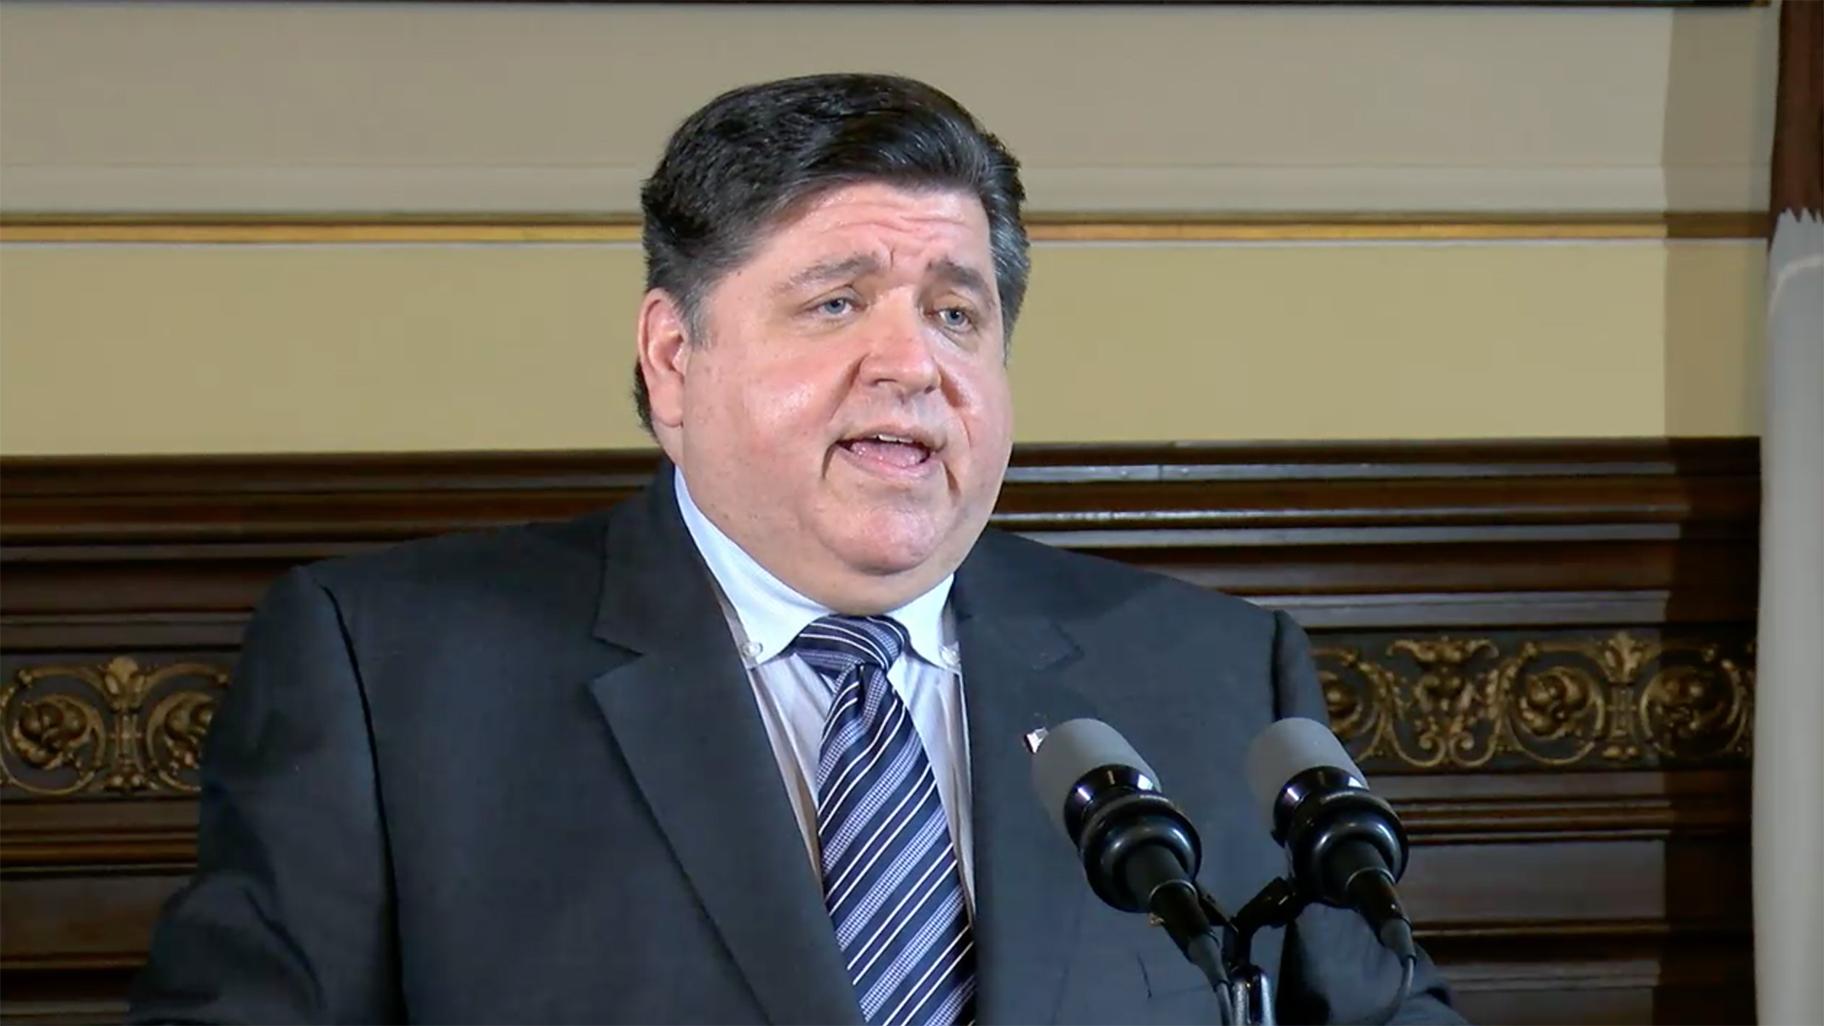 Gov. J.B. Pritzker takes questions from the media after delivering an update on COVID-19 in Illinois on Monday, Jan. 11, 2021. (WTTW News via BlueRoomStream)